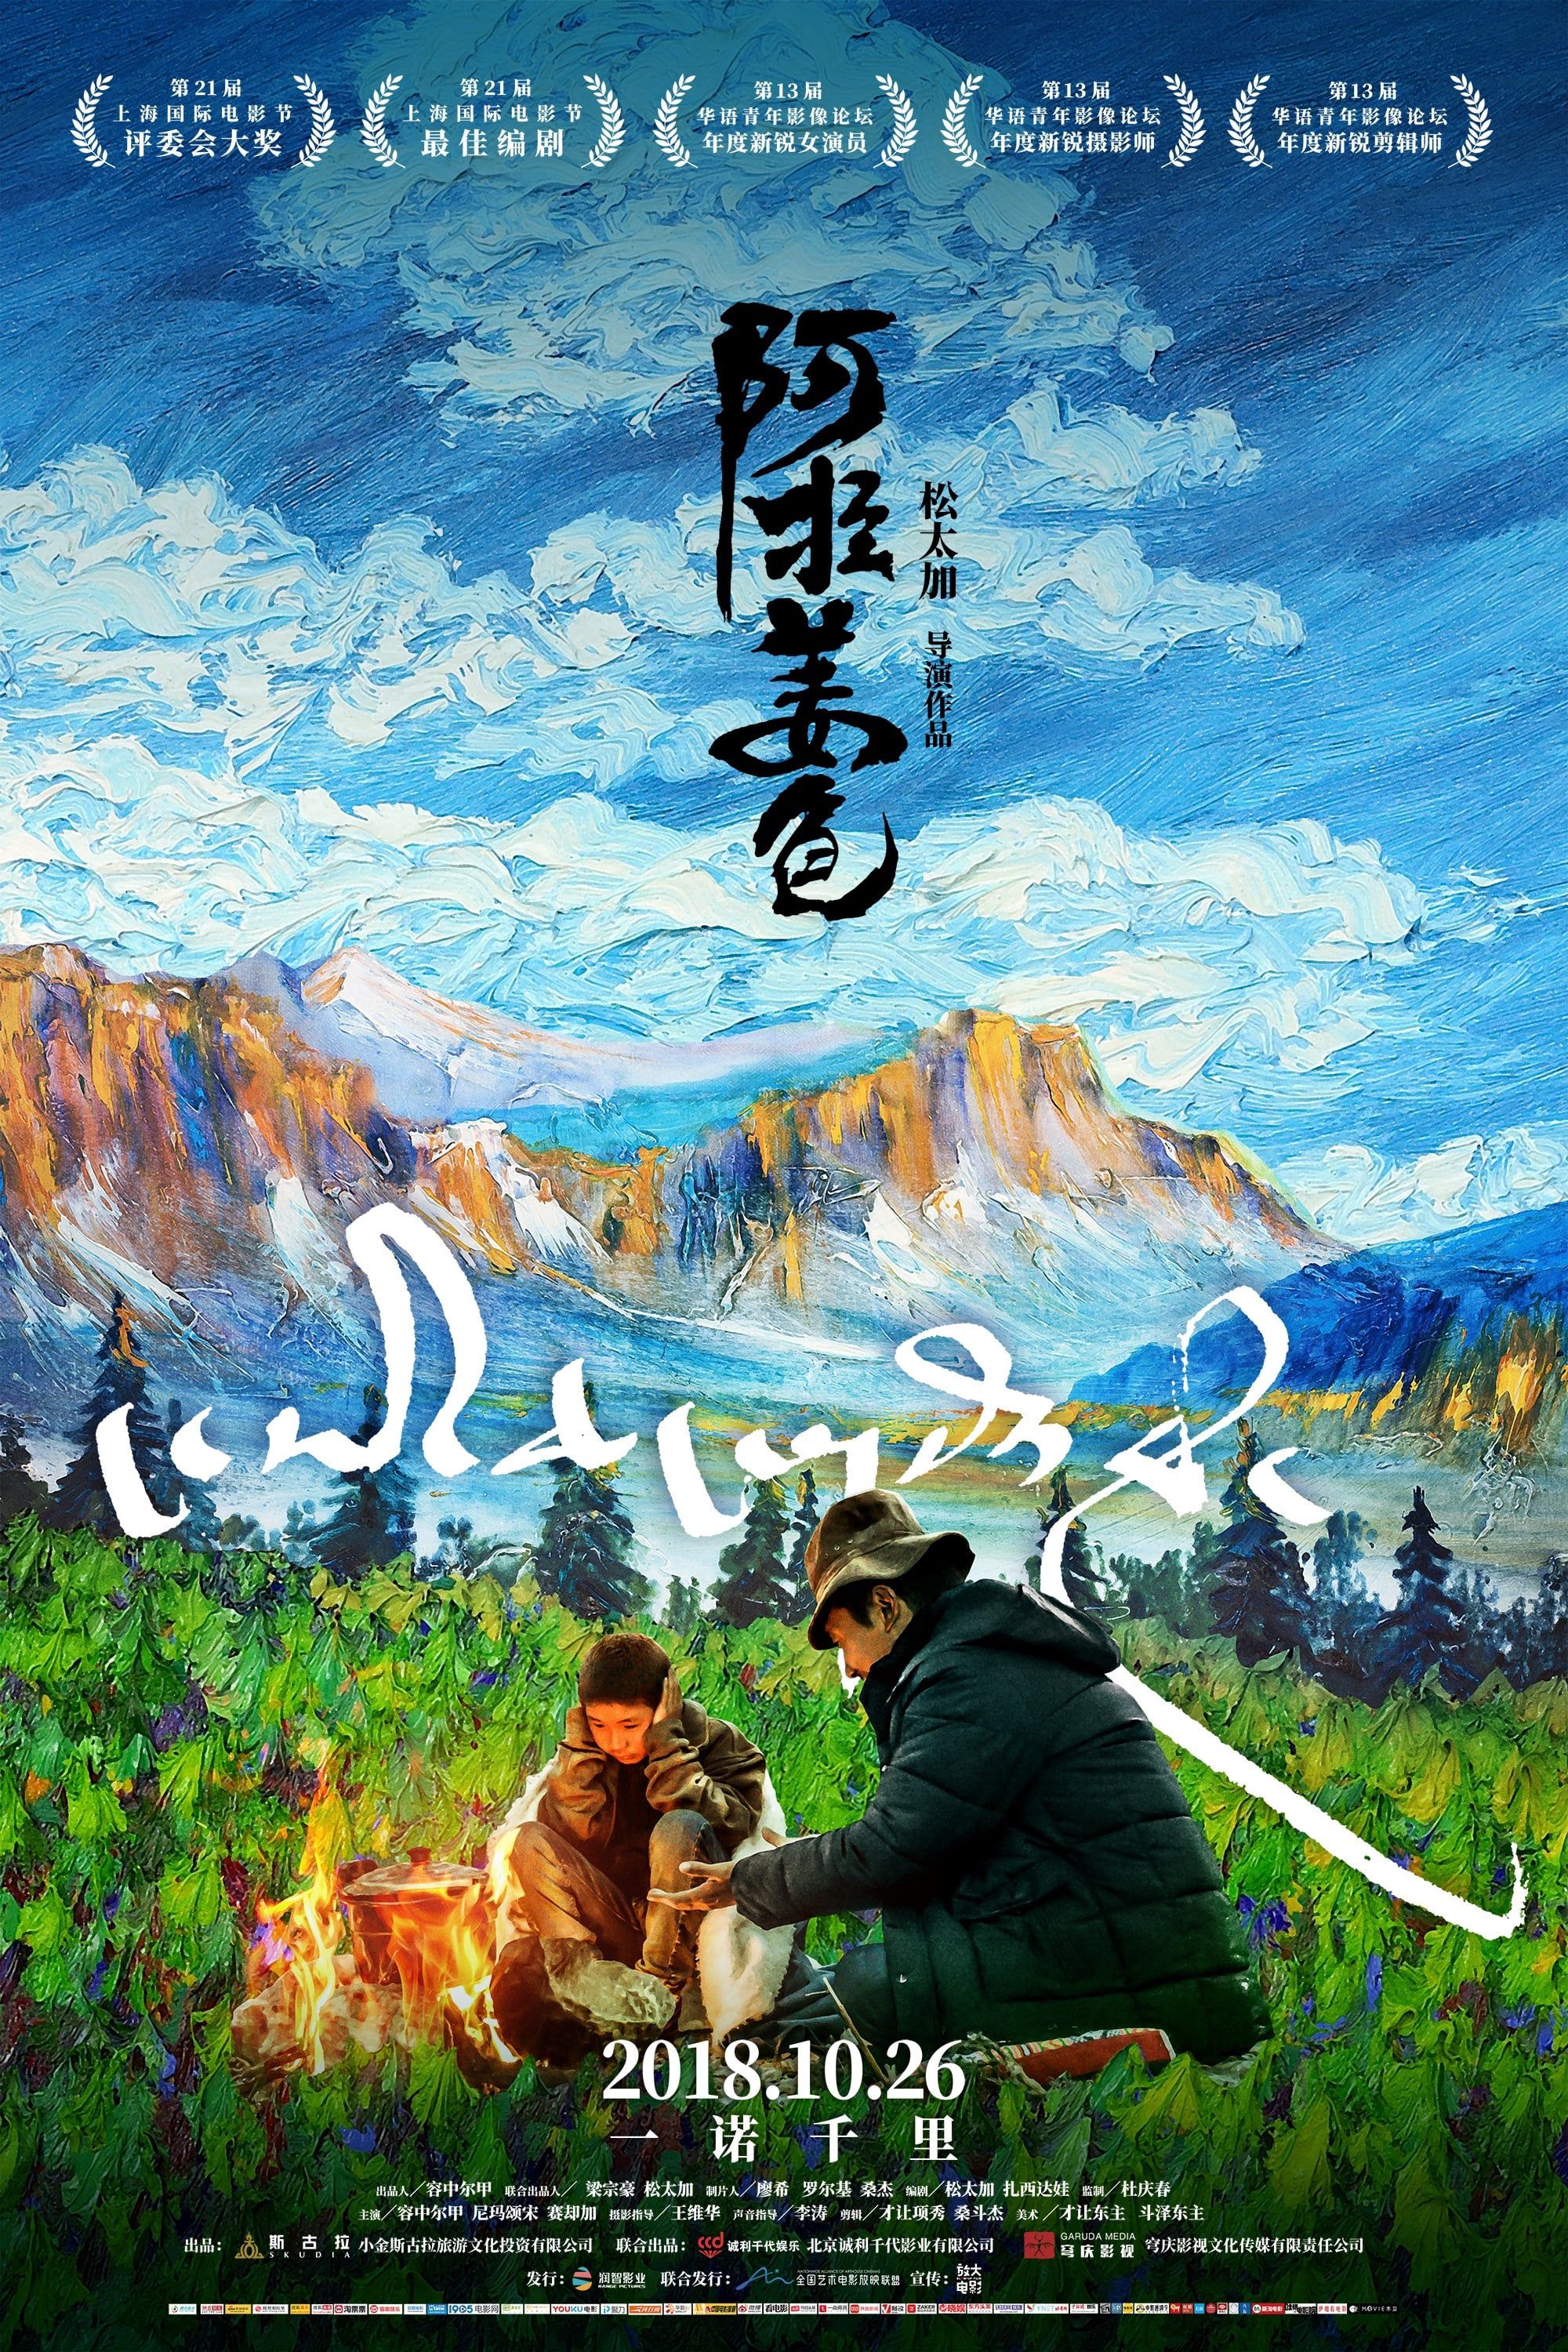 Ala Changso - Film (2020) streaming VF gratuit complet